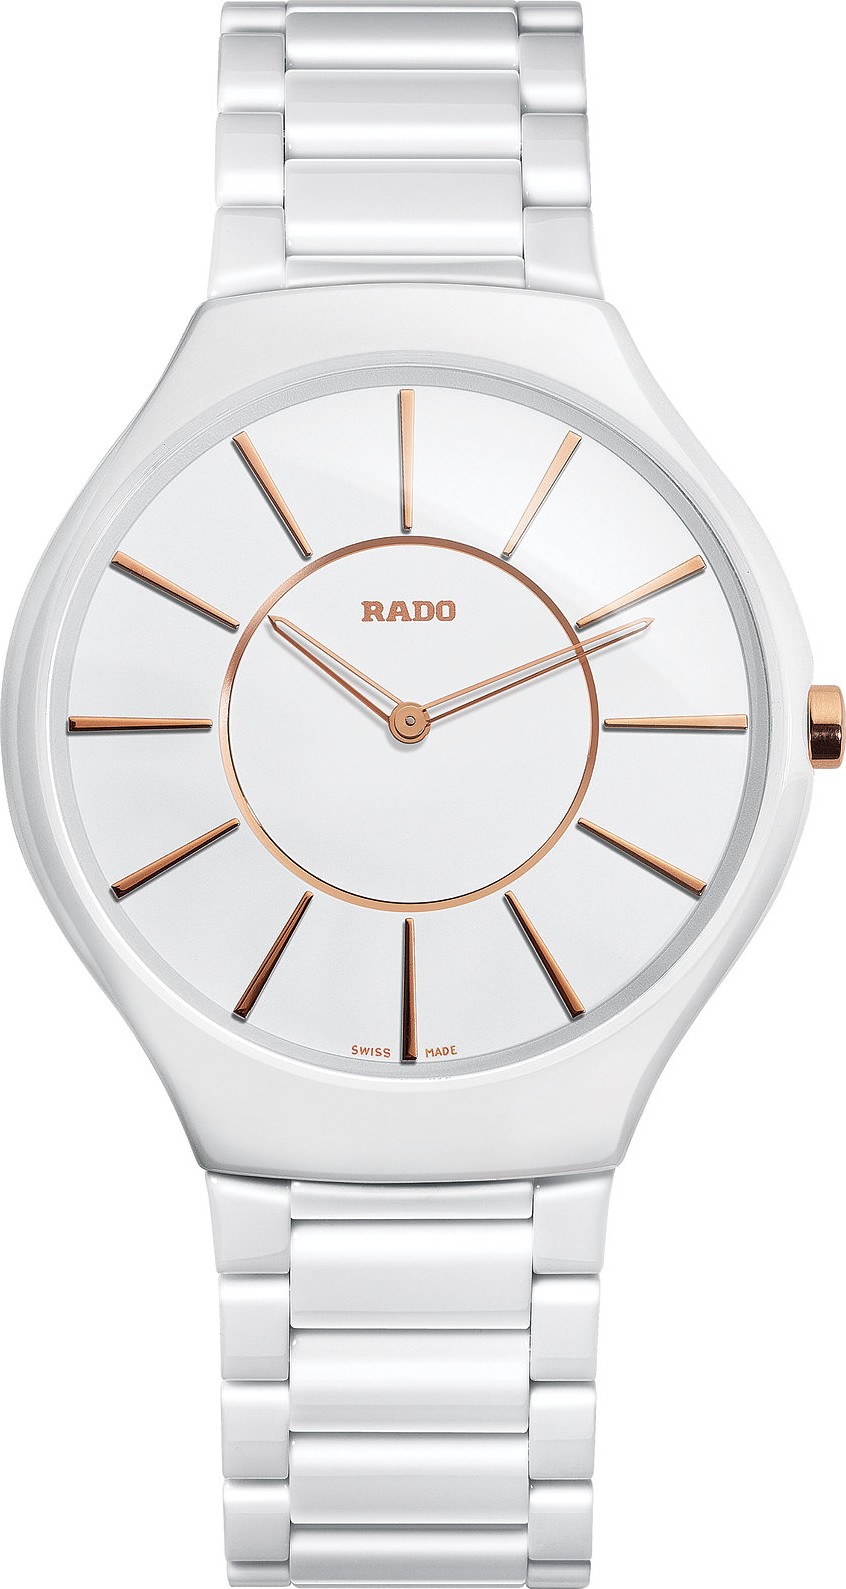 Customise your watch | RADO® Watches